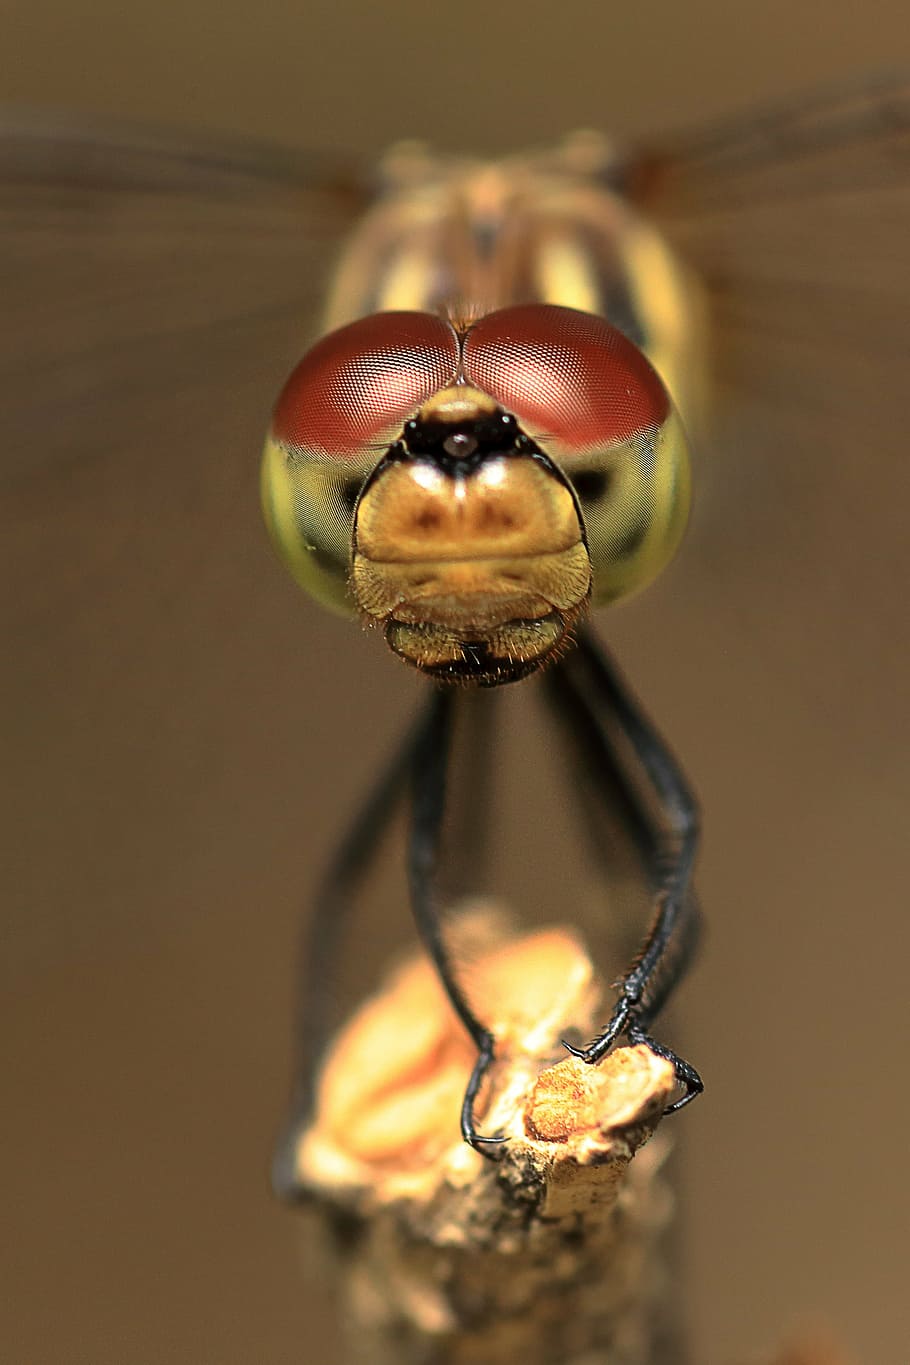 dragonfly, dragonfly eyes, insects, red dragonfly, affix, macro, compound eyes, insect, close-up, nature